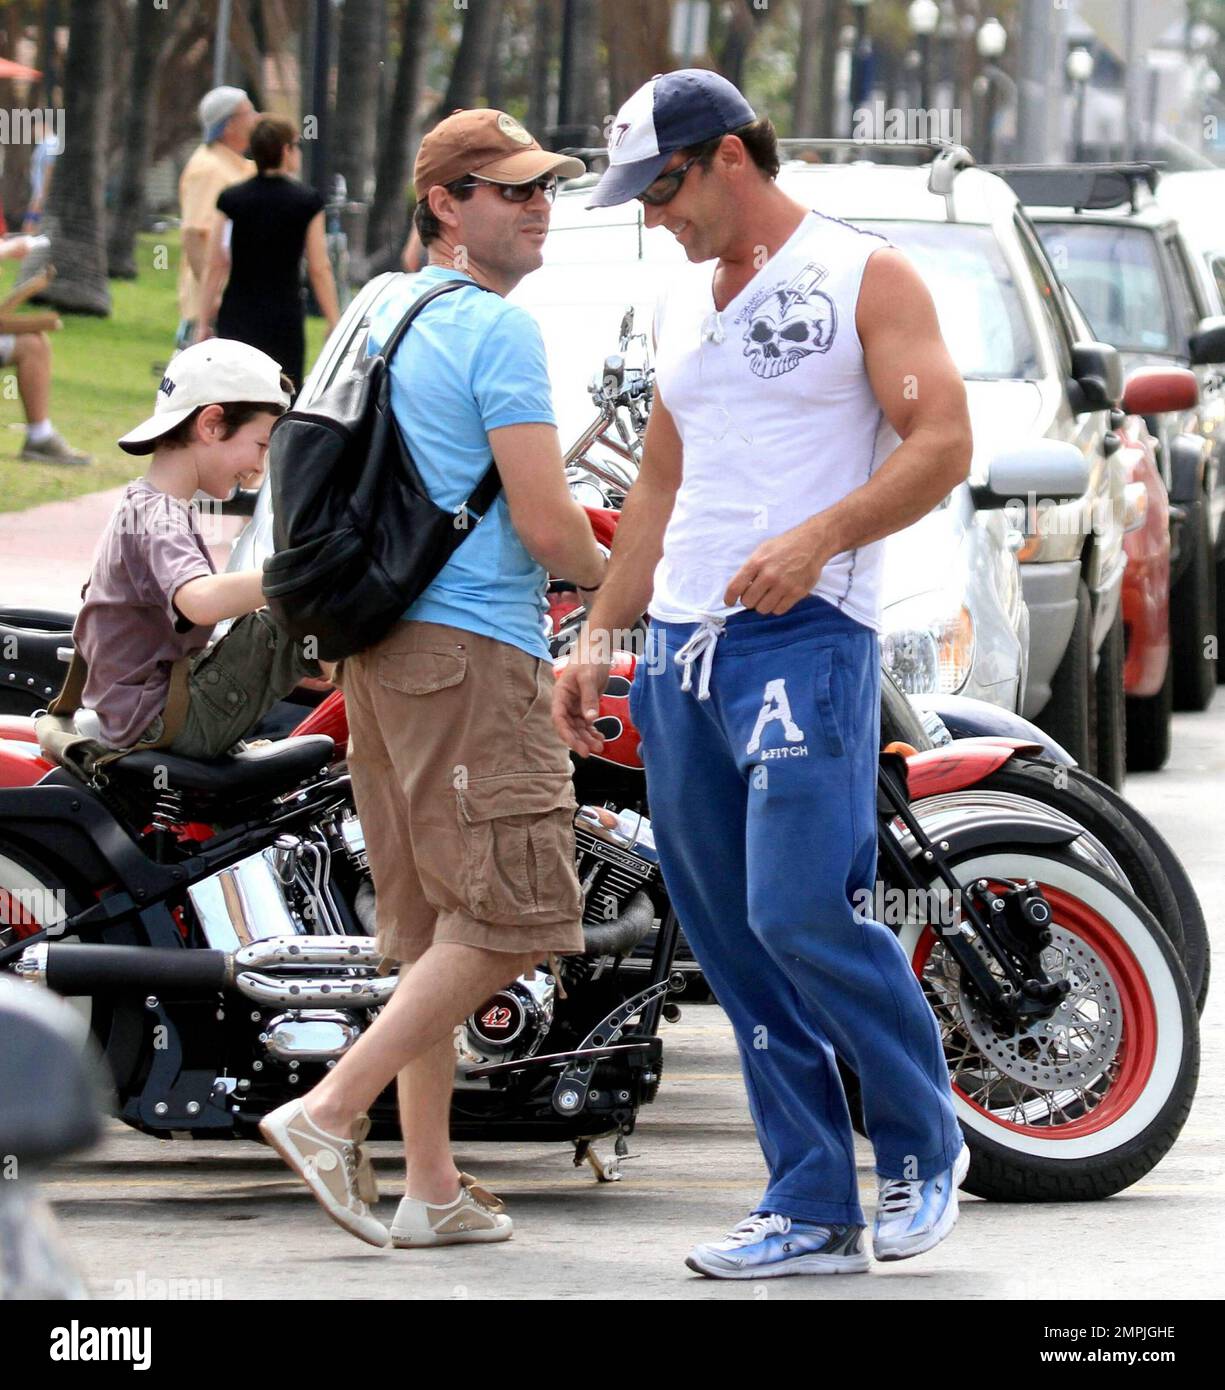 In his sweatpants and a sleeveless shirt Puerto Rican actor, singer and TV  personality Carlos Ponce takes his motorcycle out for a spin in Miami Beach  while listening to some tunes on